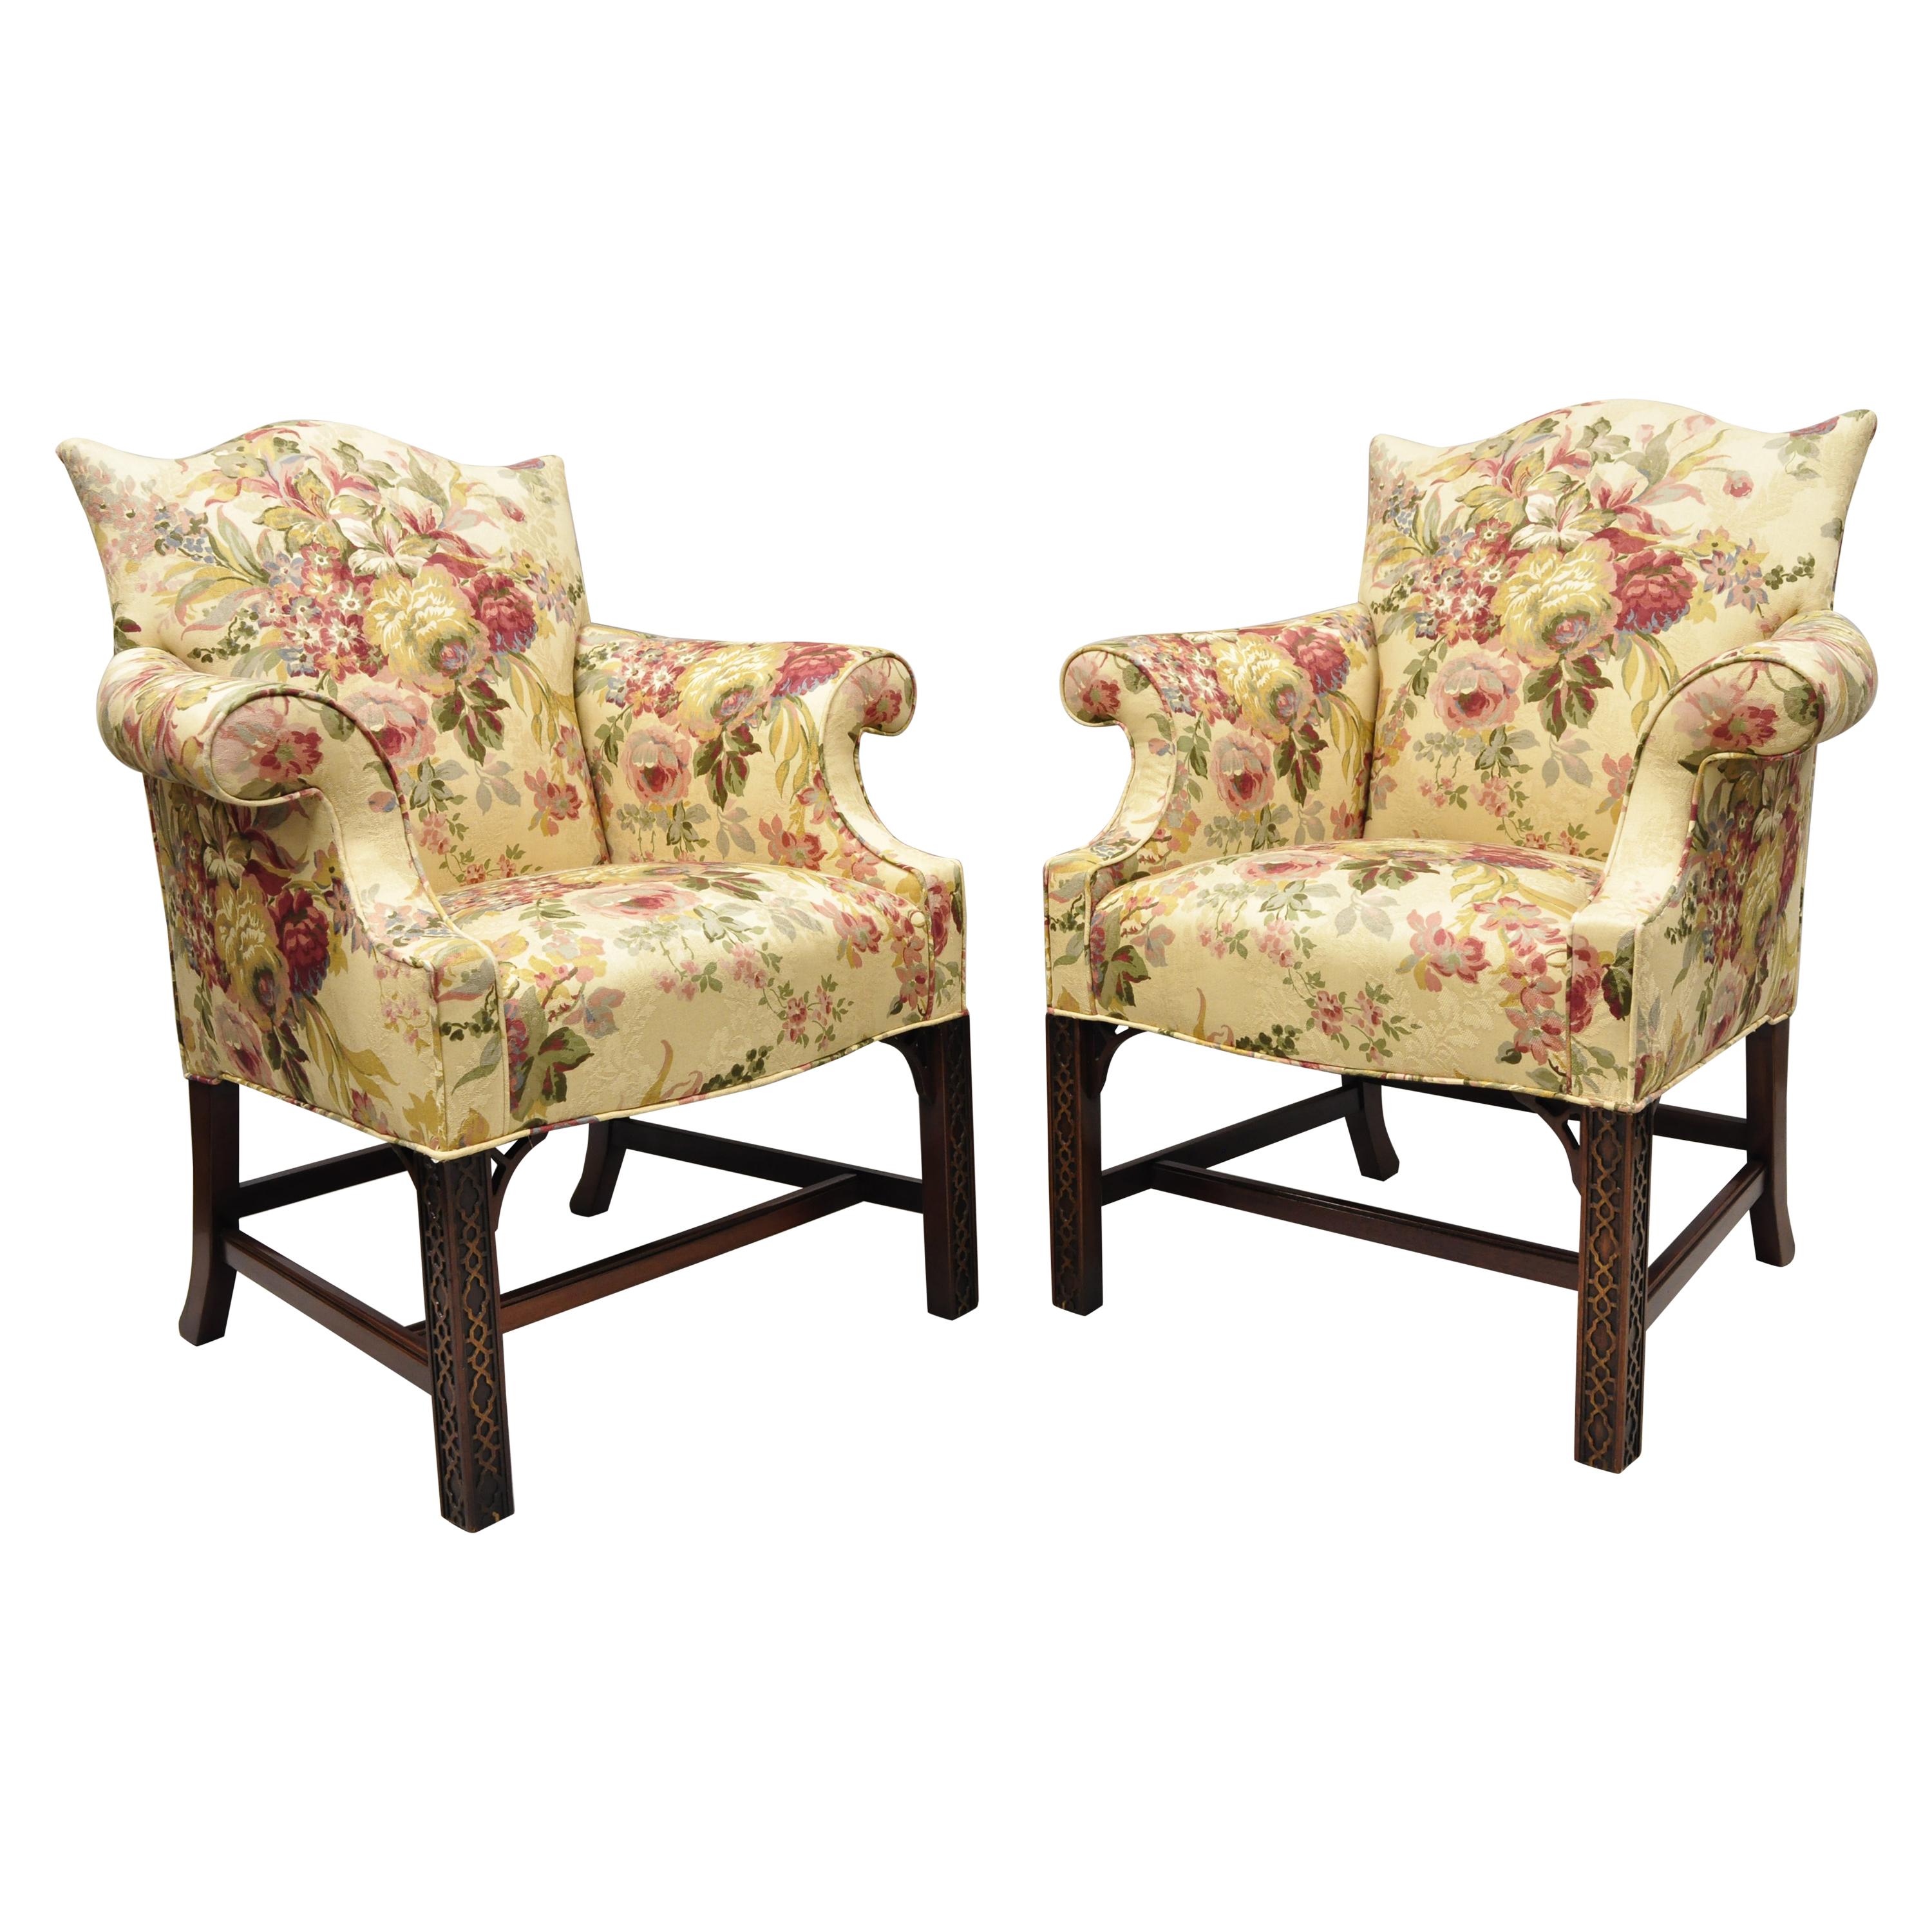 Southwood Chinese Chippendale Carved Fretwork Legs Lounge Armchairs, a Pair